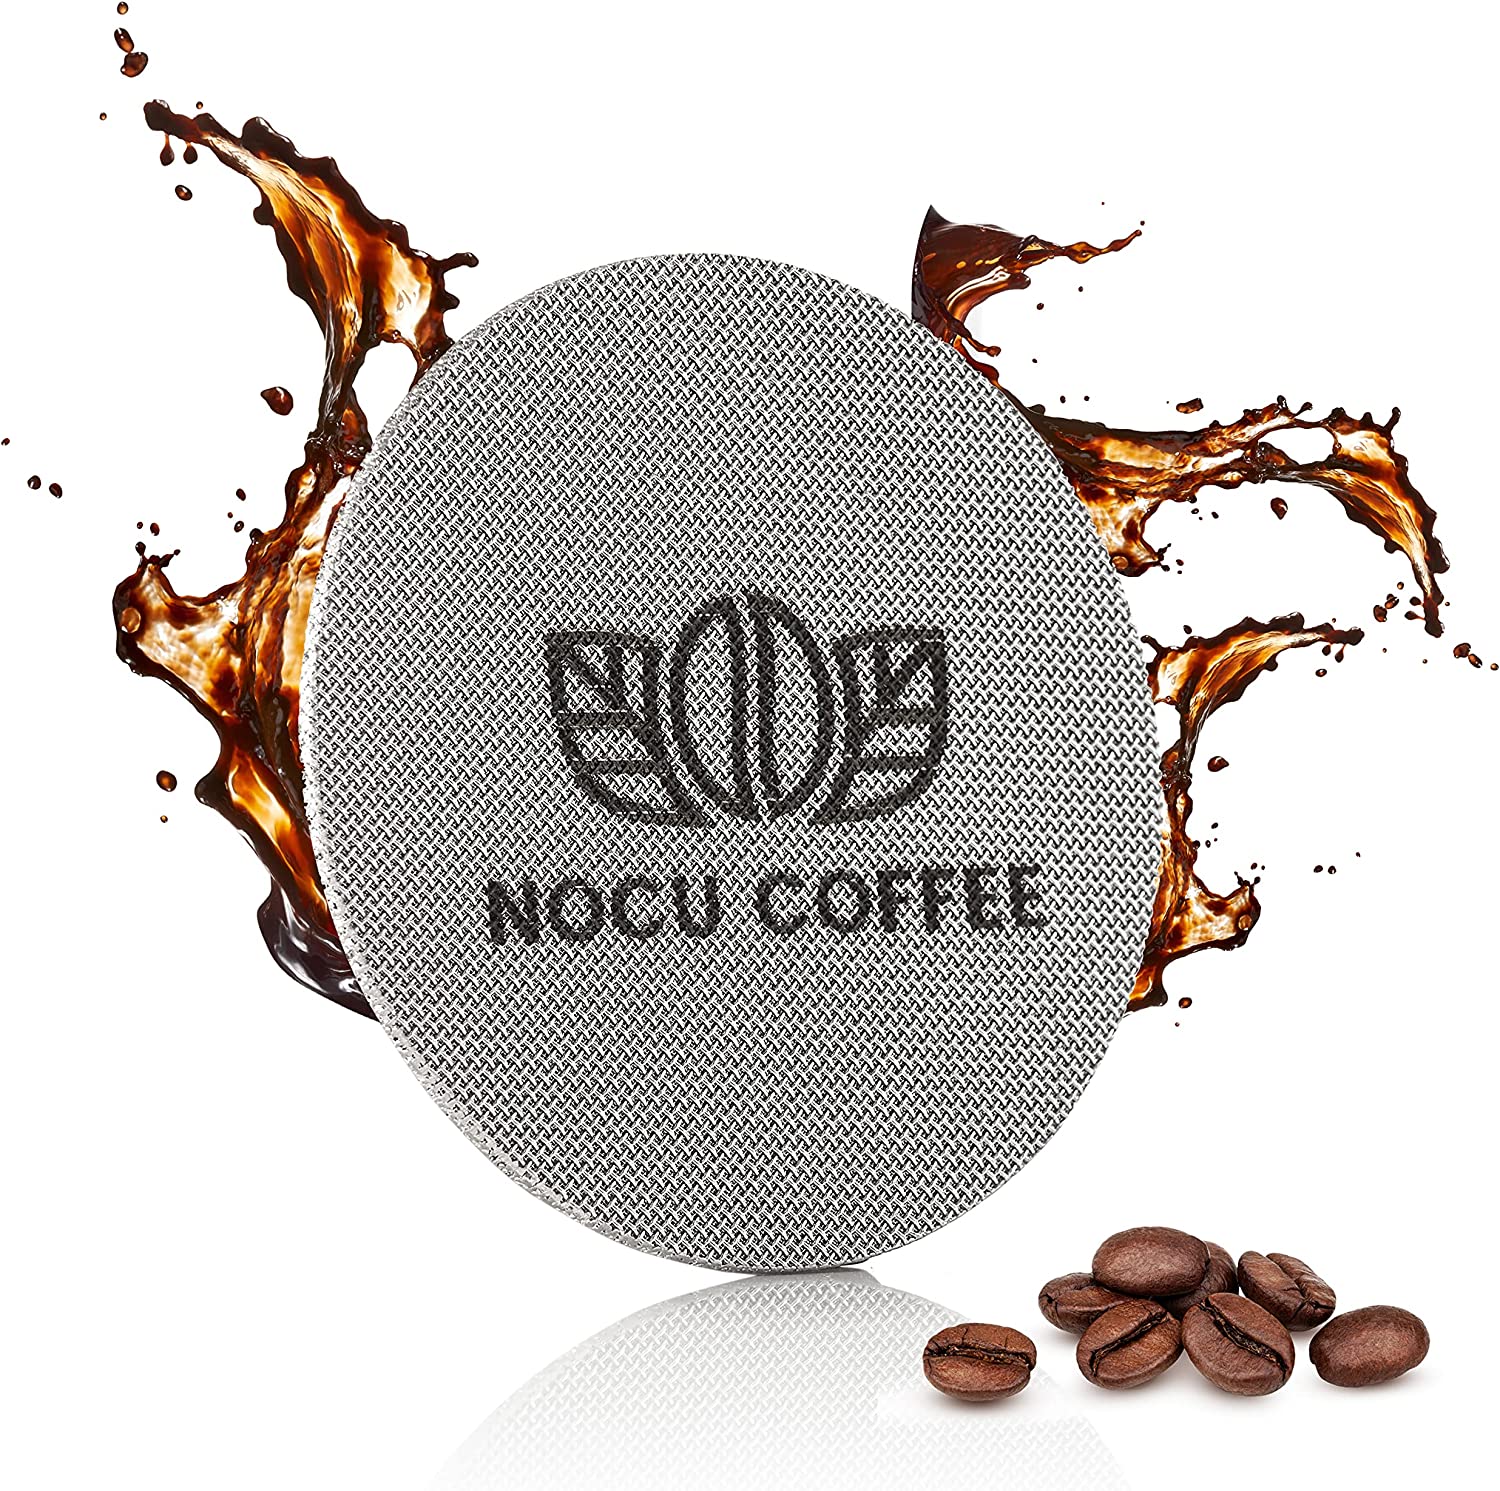 Nocu Coffee Espresso Puck Screen 57.5 mm for Lelit and Ascaso 57 mm portafilter - Food -grade Stainless Steel Coffee Filter Reusable Round With 1.7 mm Thickness - Permanent Coffee Filter